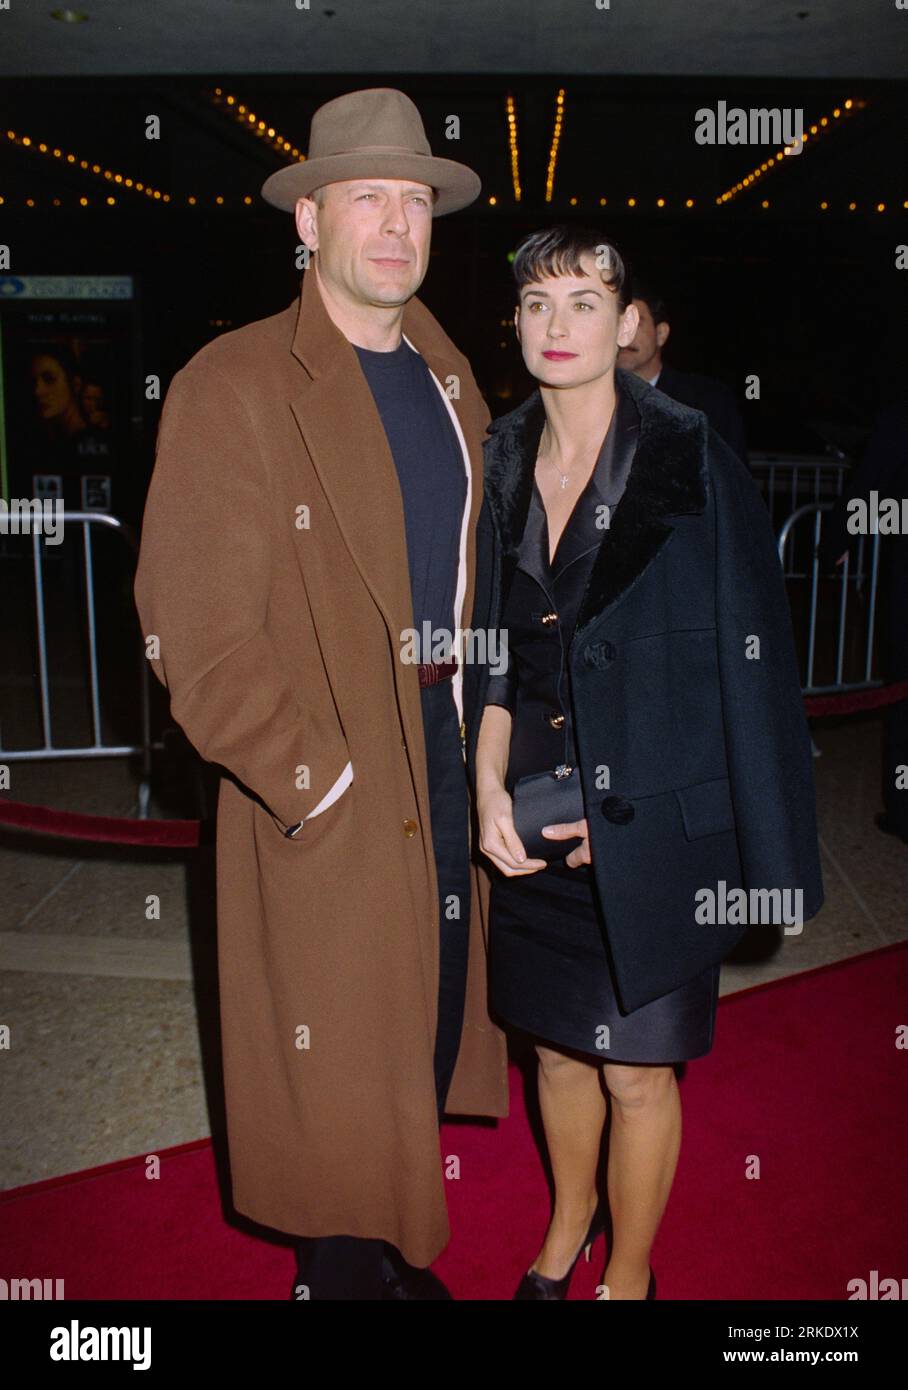 LOS ANGELES, CA. January 29, 1996: Actor Bruce Willis & actress Demi Moore at the premiere of ÒThe JurorÓ at the Cineplex Odeon Cinema, Century City Picture: Paul Smith / Featureflash Stock Photo